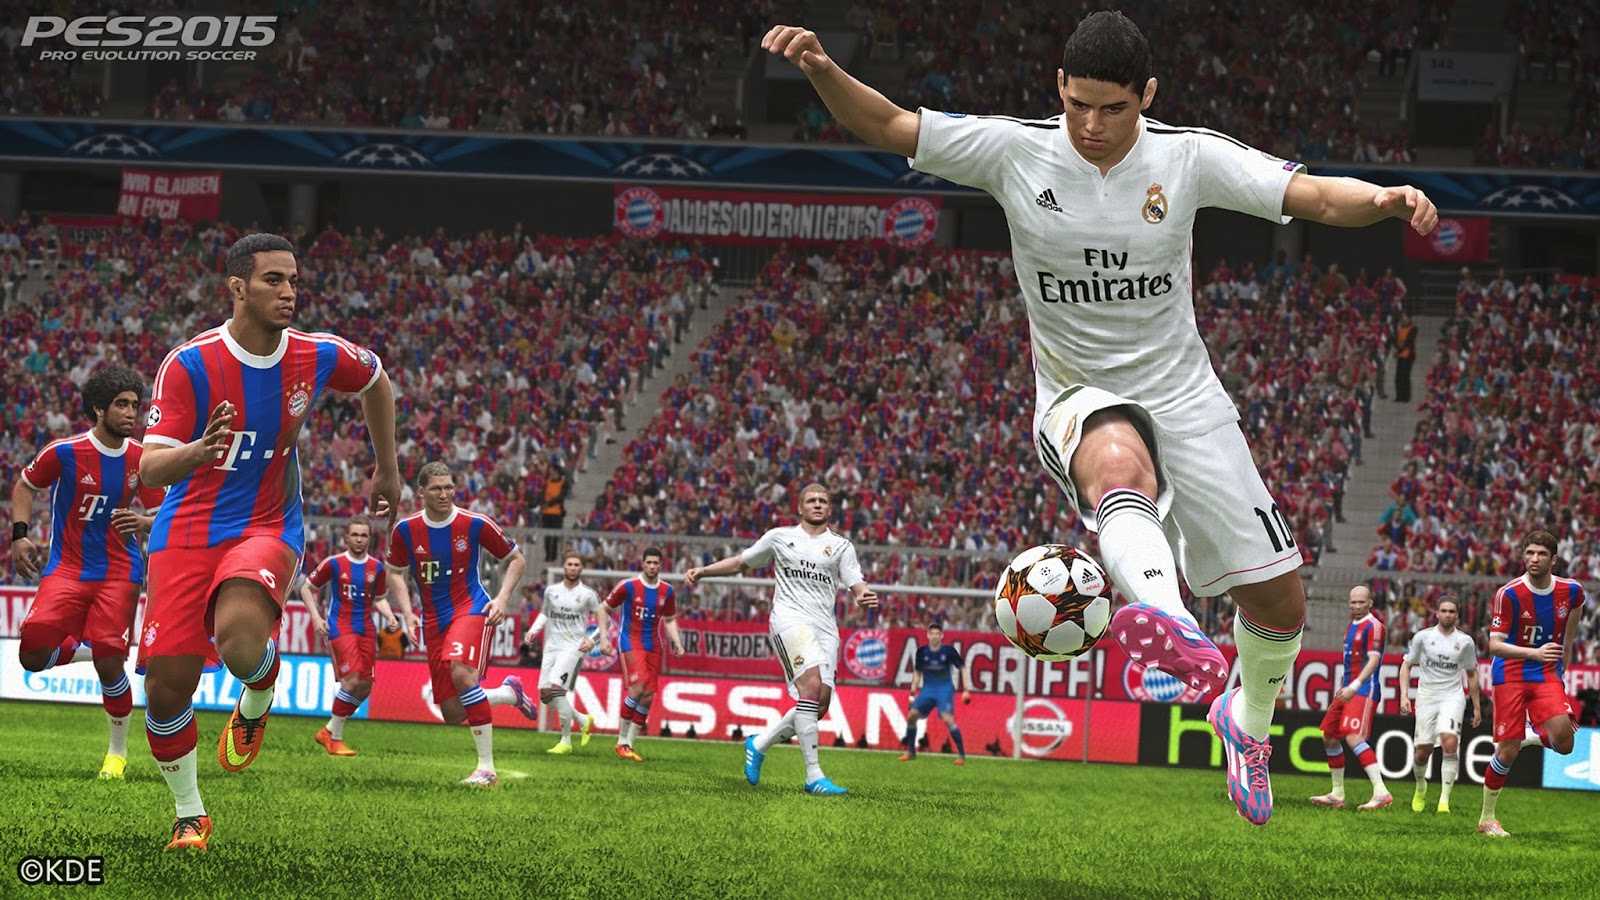 pes 2015 free download for pc